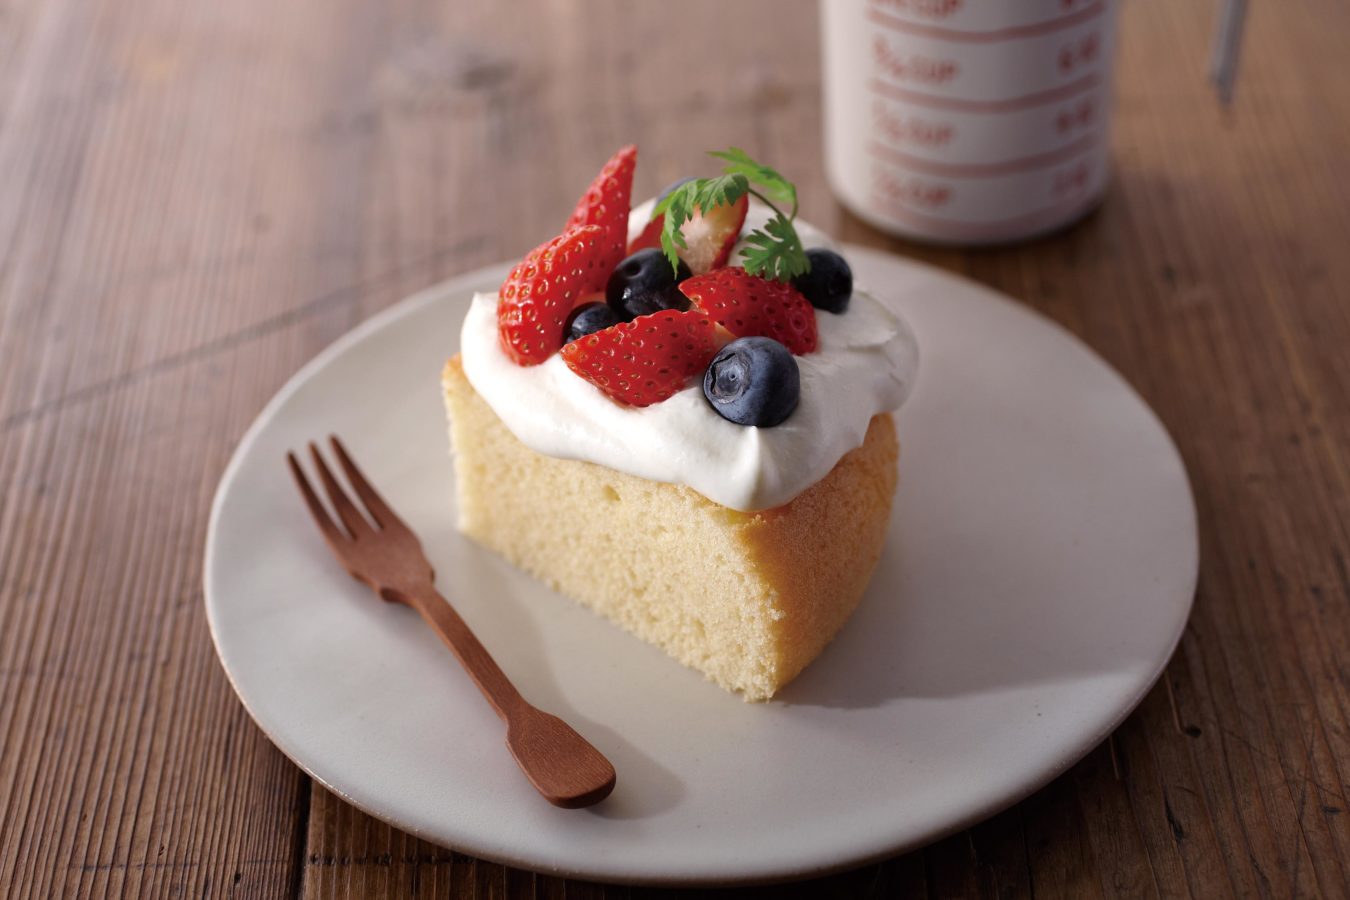 Slice of rice cooker sponge cake with whipped cream and berries